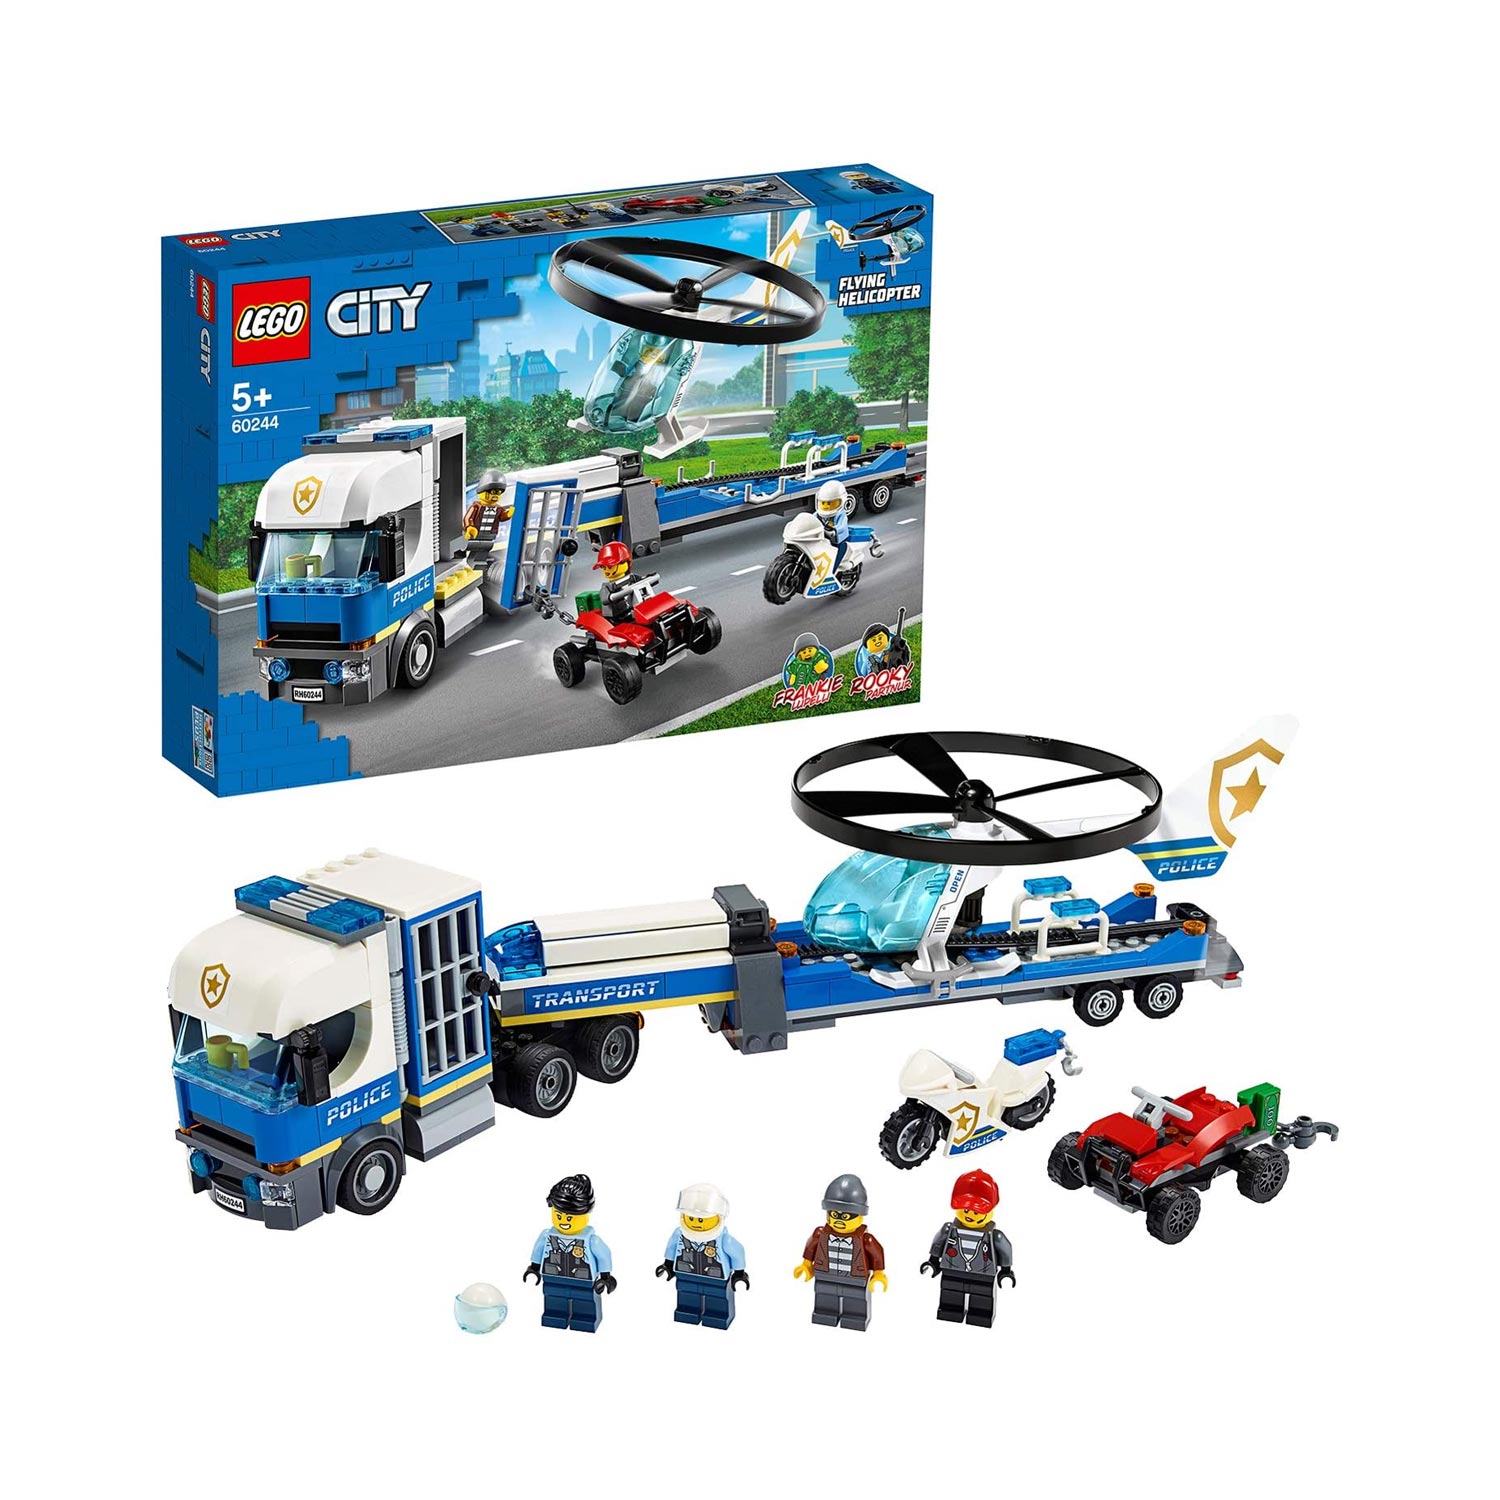 Police Helicopter Transport/City